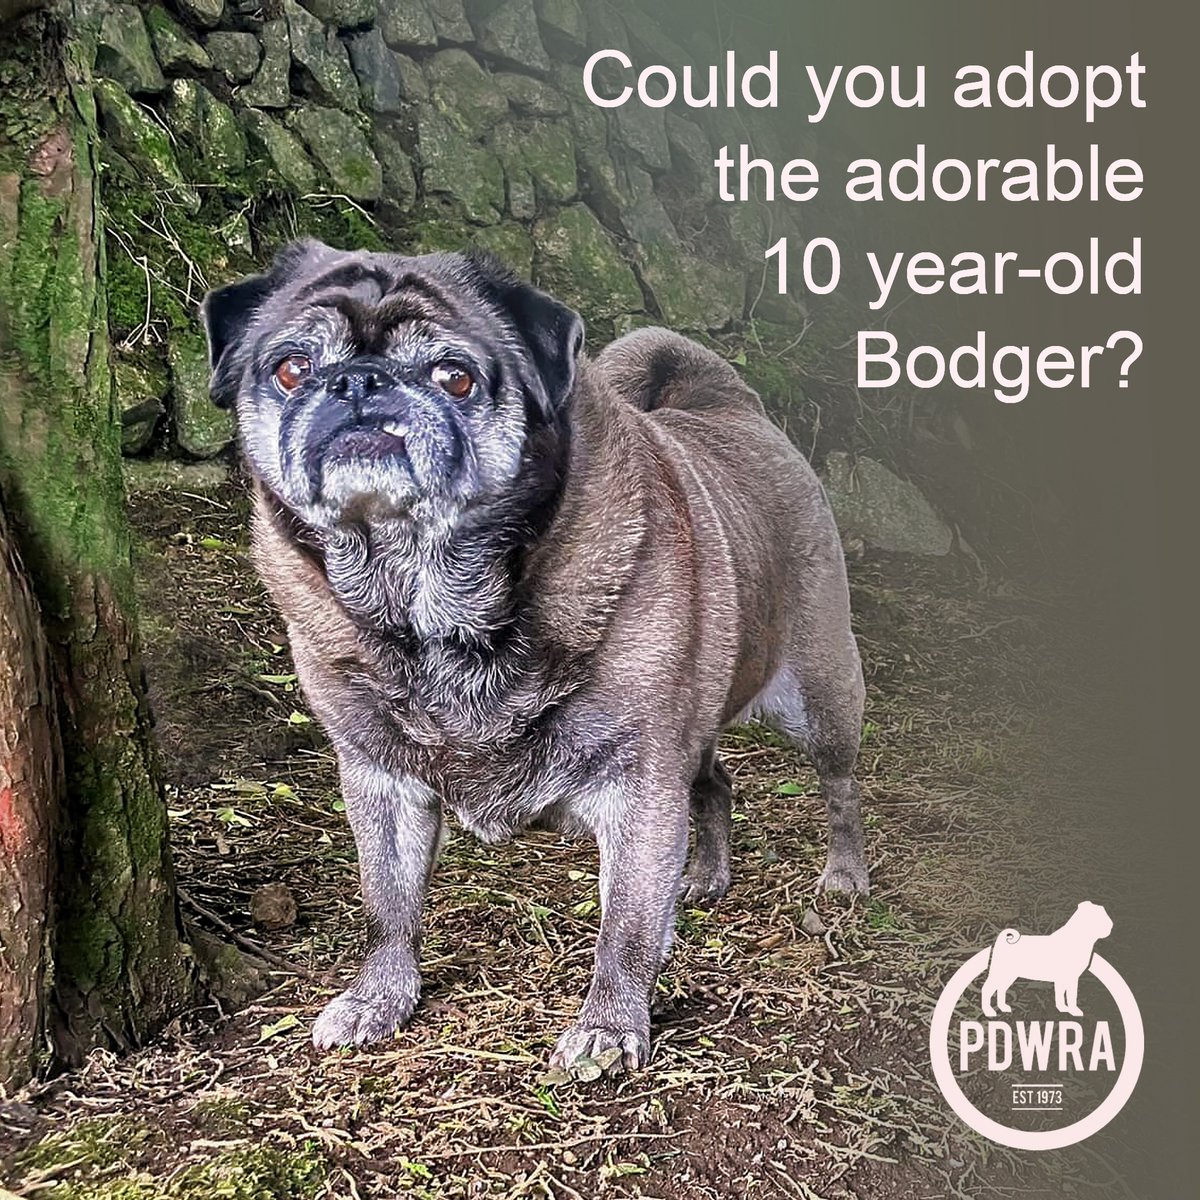 Bodger is looking for his loving forever home! If you could make Bodger’s dreams come true, could love this fun-loving boy and offer him a forever home, please apply! - ecs.page.link/7qs9t
#pdwra #pugcharity #pugwelfare #friendsofwelfare #foreverhome #pugadoption #pug